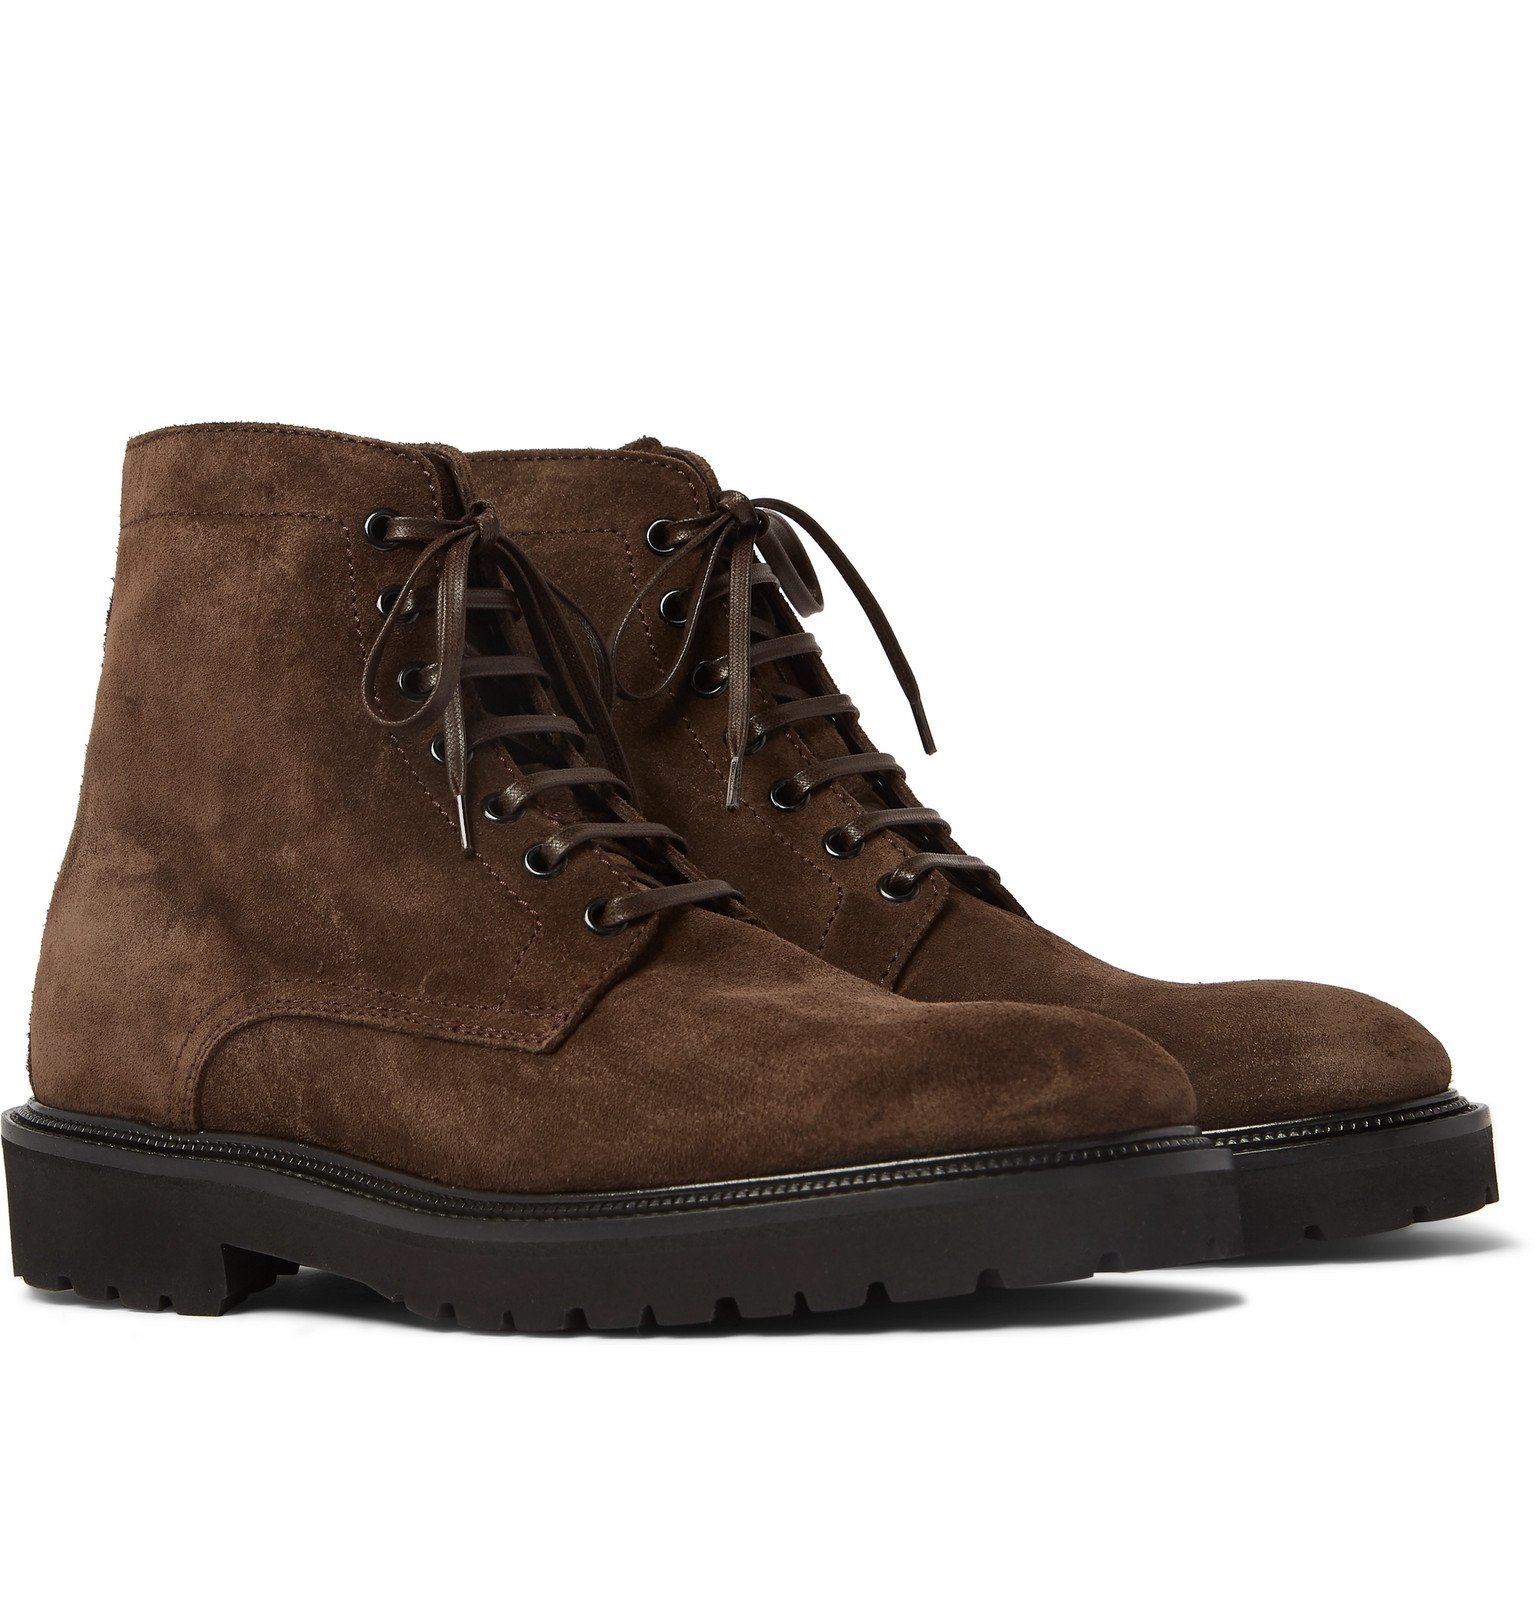 Paul Smith - Farley Suede Boots - Brown Paul Smith